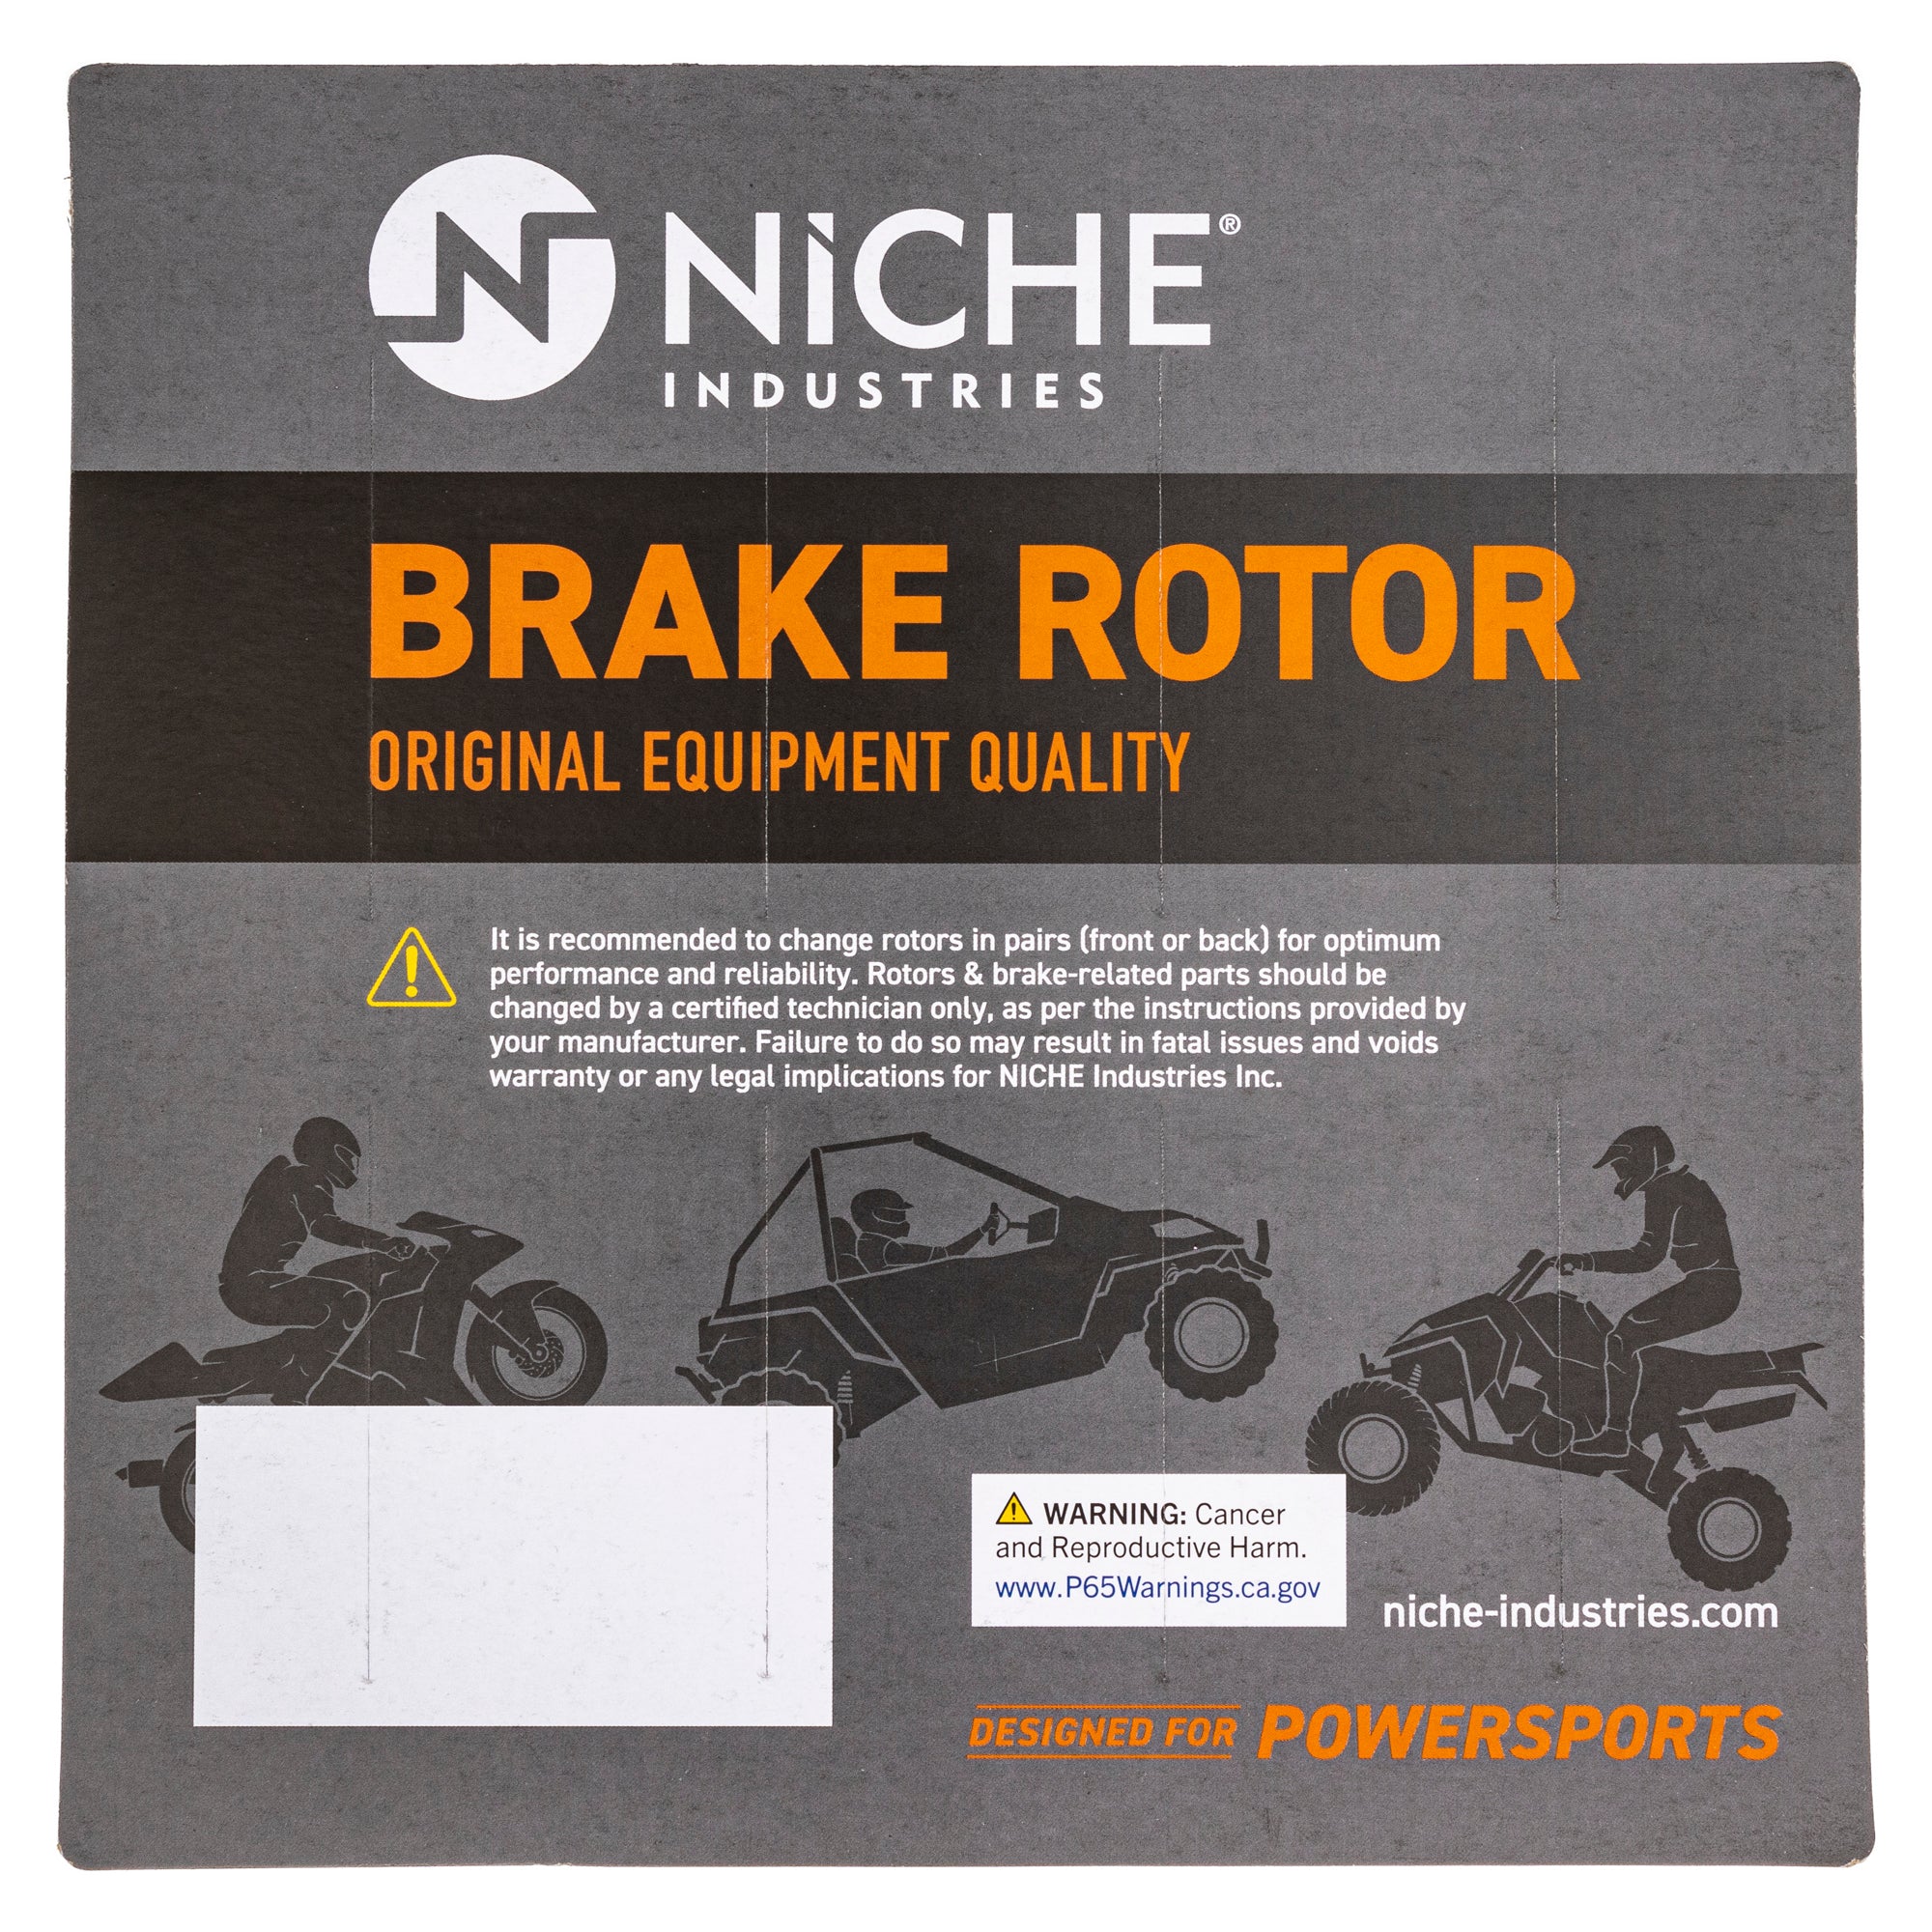 NICHE 519-CRT2264R Brake Rotor for zOTHER Arctic Cat Textron Cat